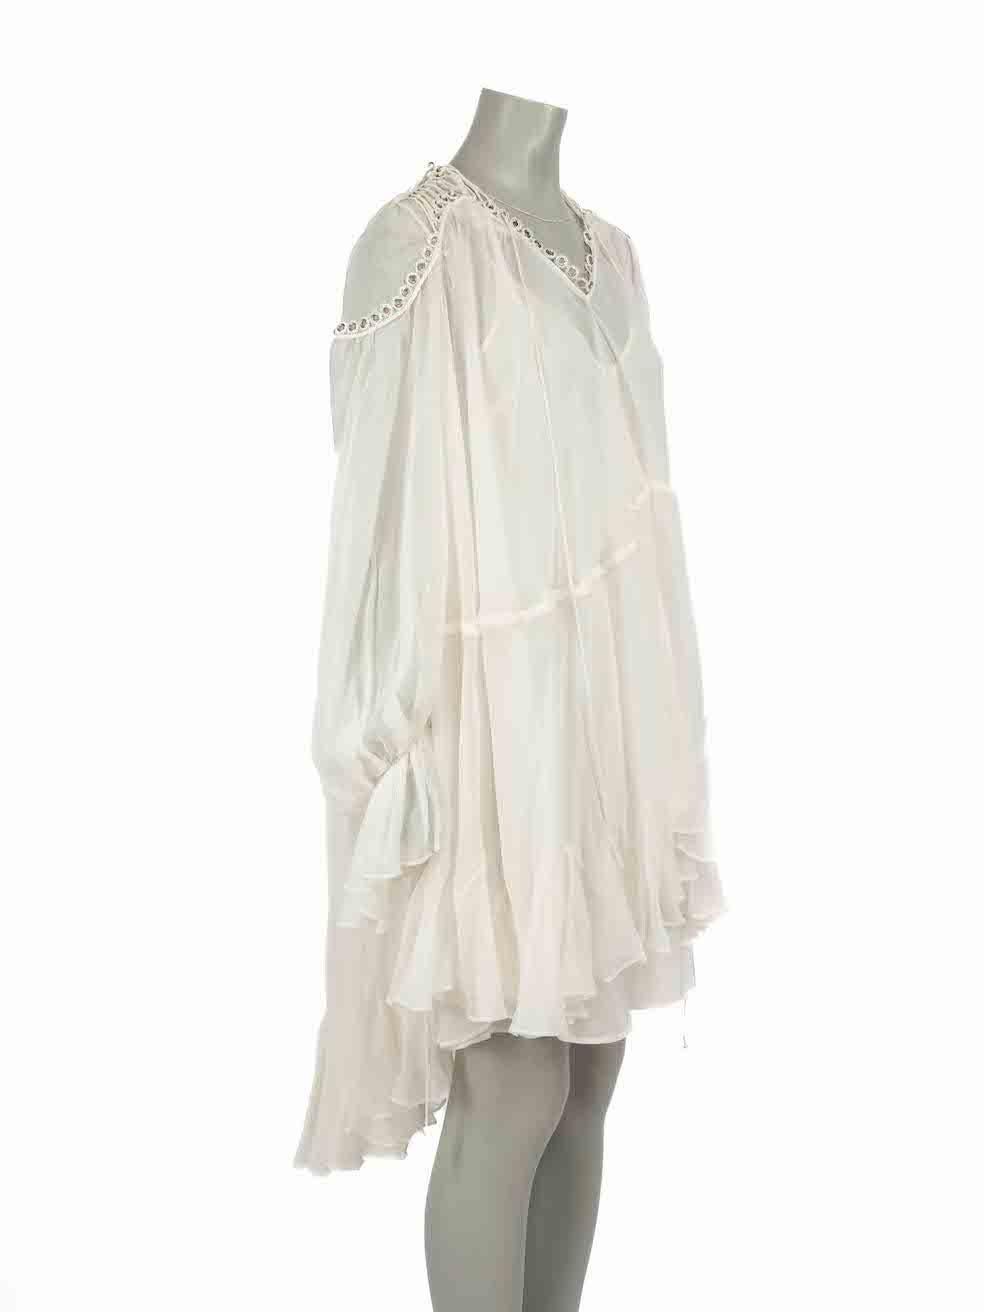 CONDITION is Very good. Hardly any visible wear to dress is evident on this used Jonathan Simkhai designer resale item.
 
Details
White
Silk
Dress
Sheer
Neck tie
Eyelet lace up detail
Draped
Long sleeves
Slip underdress included
 
Made in China
